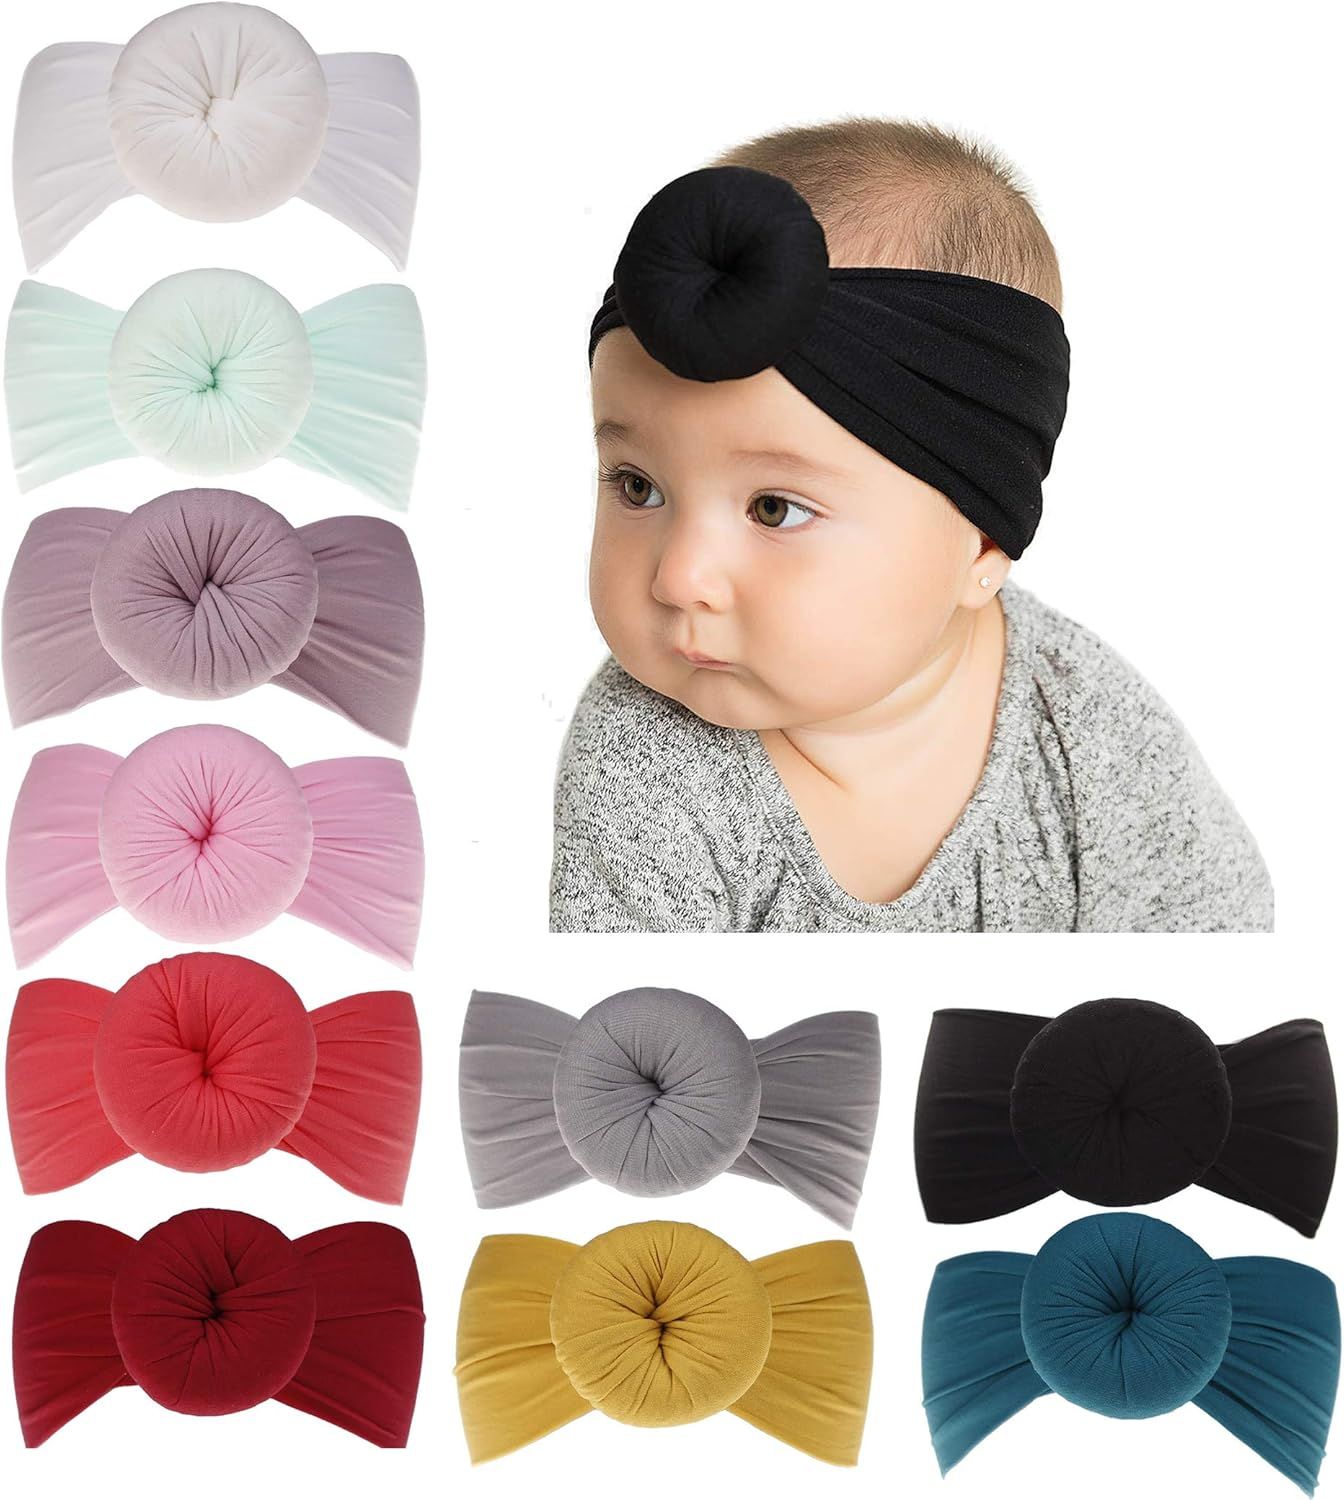 inSowni Super Stretchy Nylon Donut Ball Headbands for Baby Girls Toddlers Infant | Amazon (US)